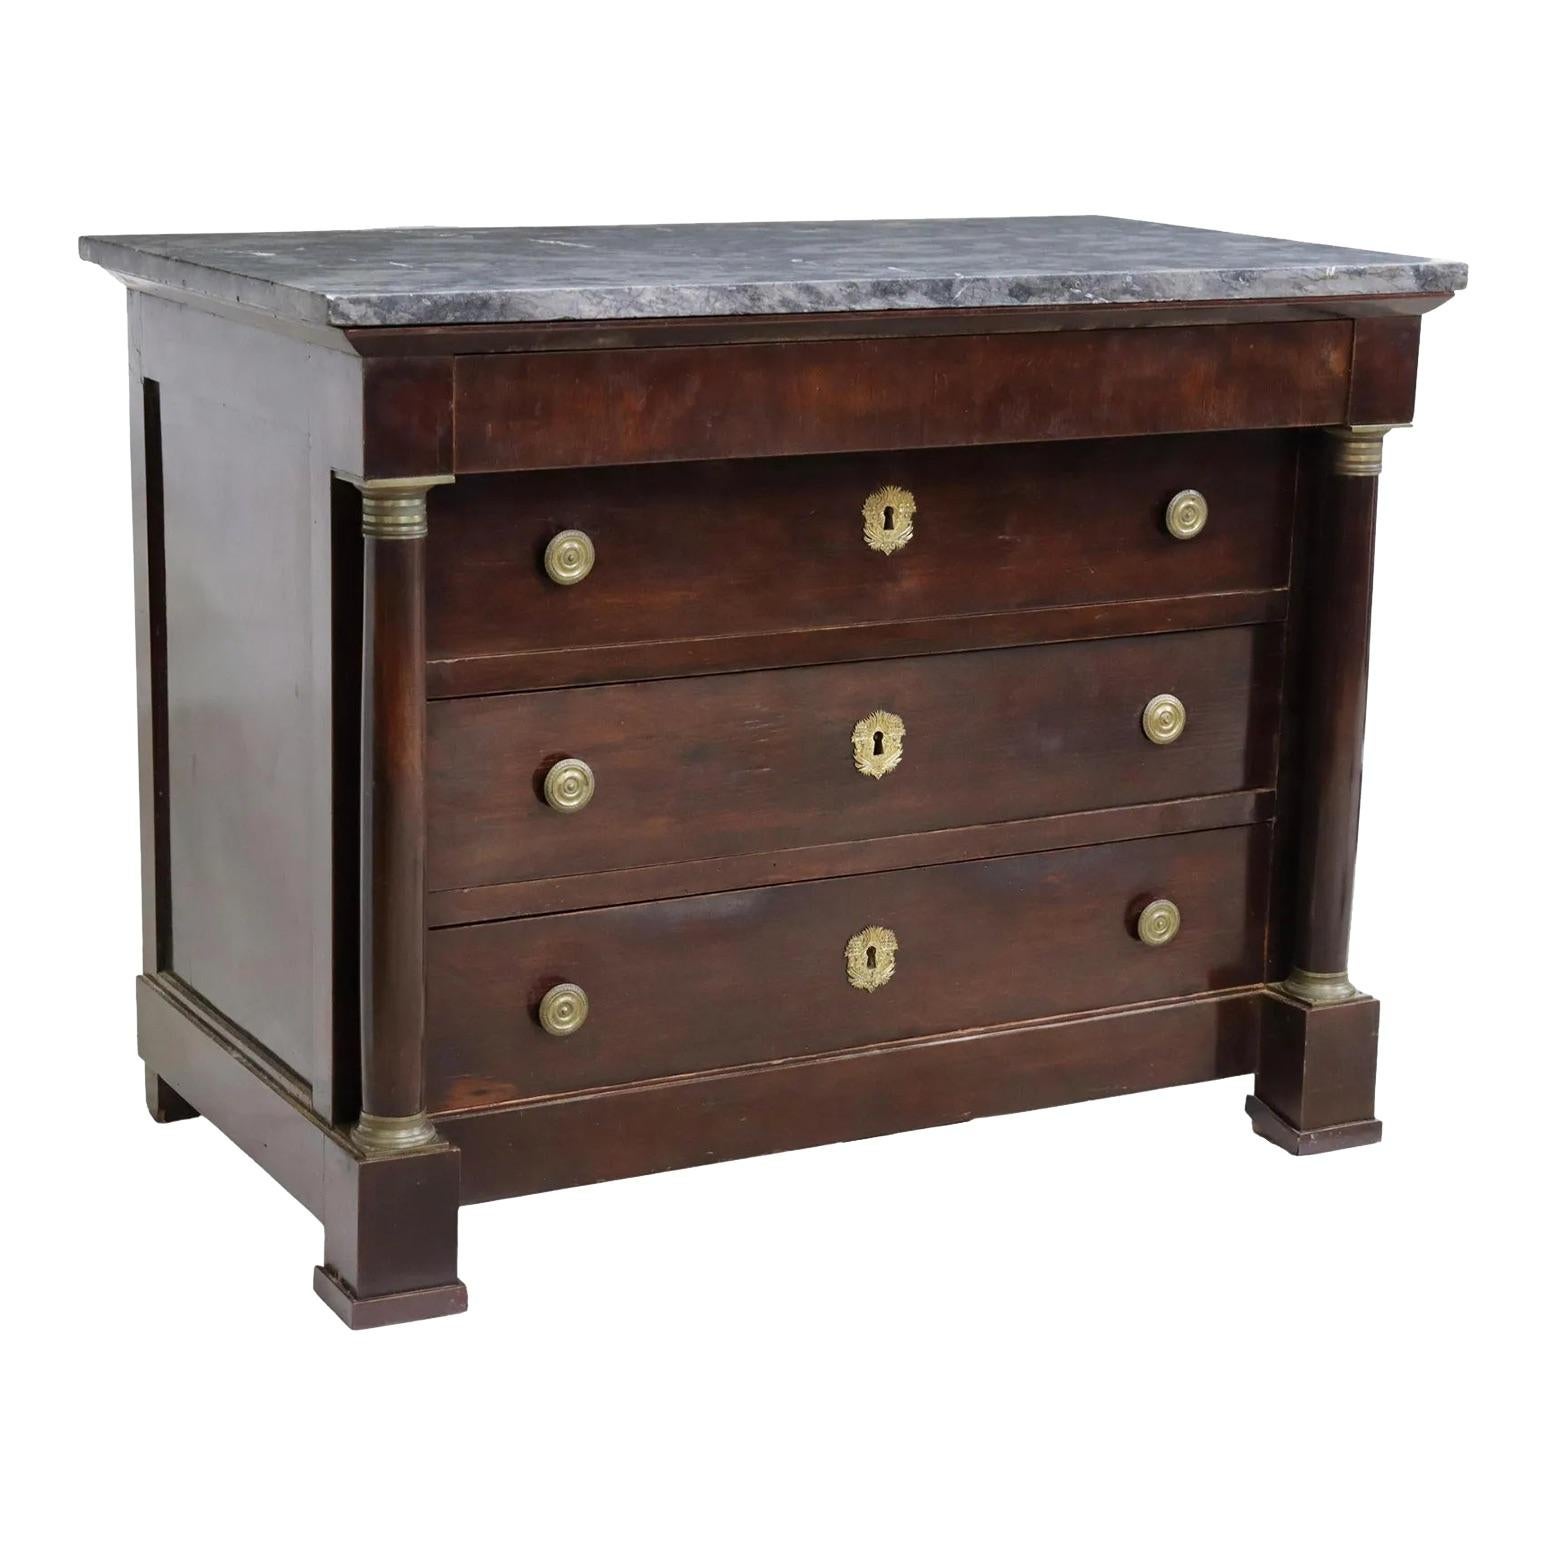 Antique French Empire Style Marble-Top Mahogany Commode